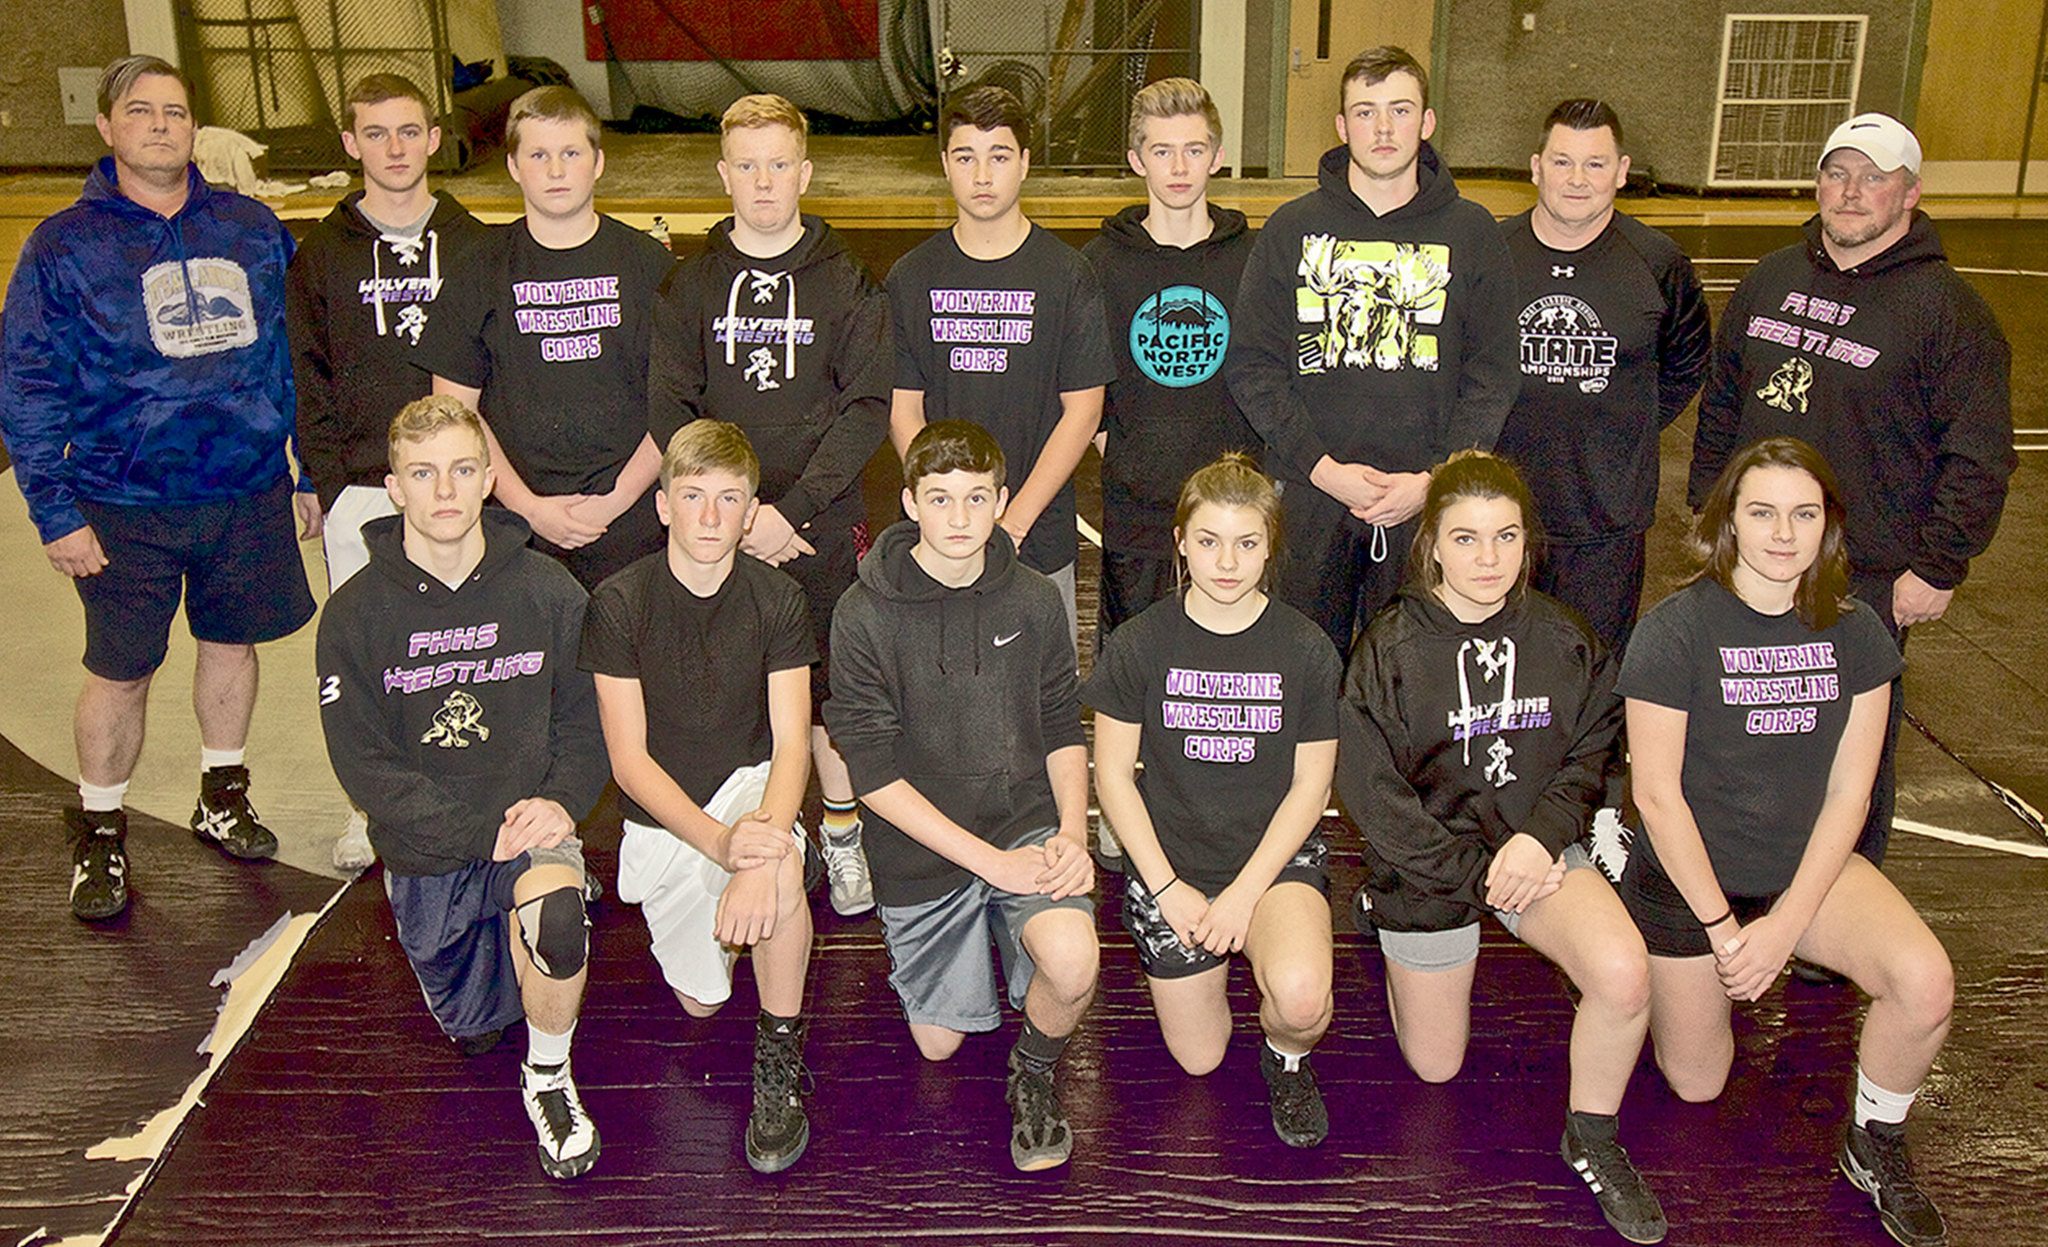 Coach Pyle looks to capture league title for grapplers